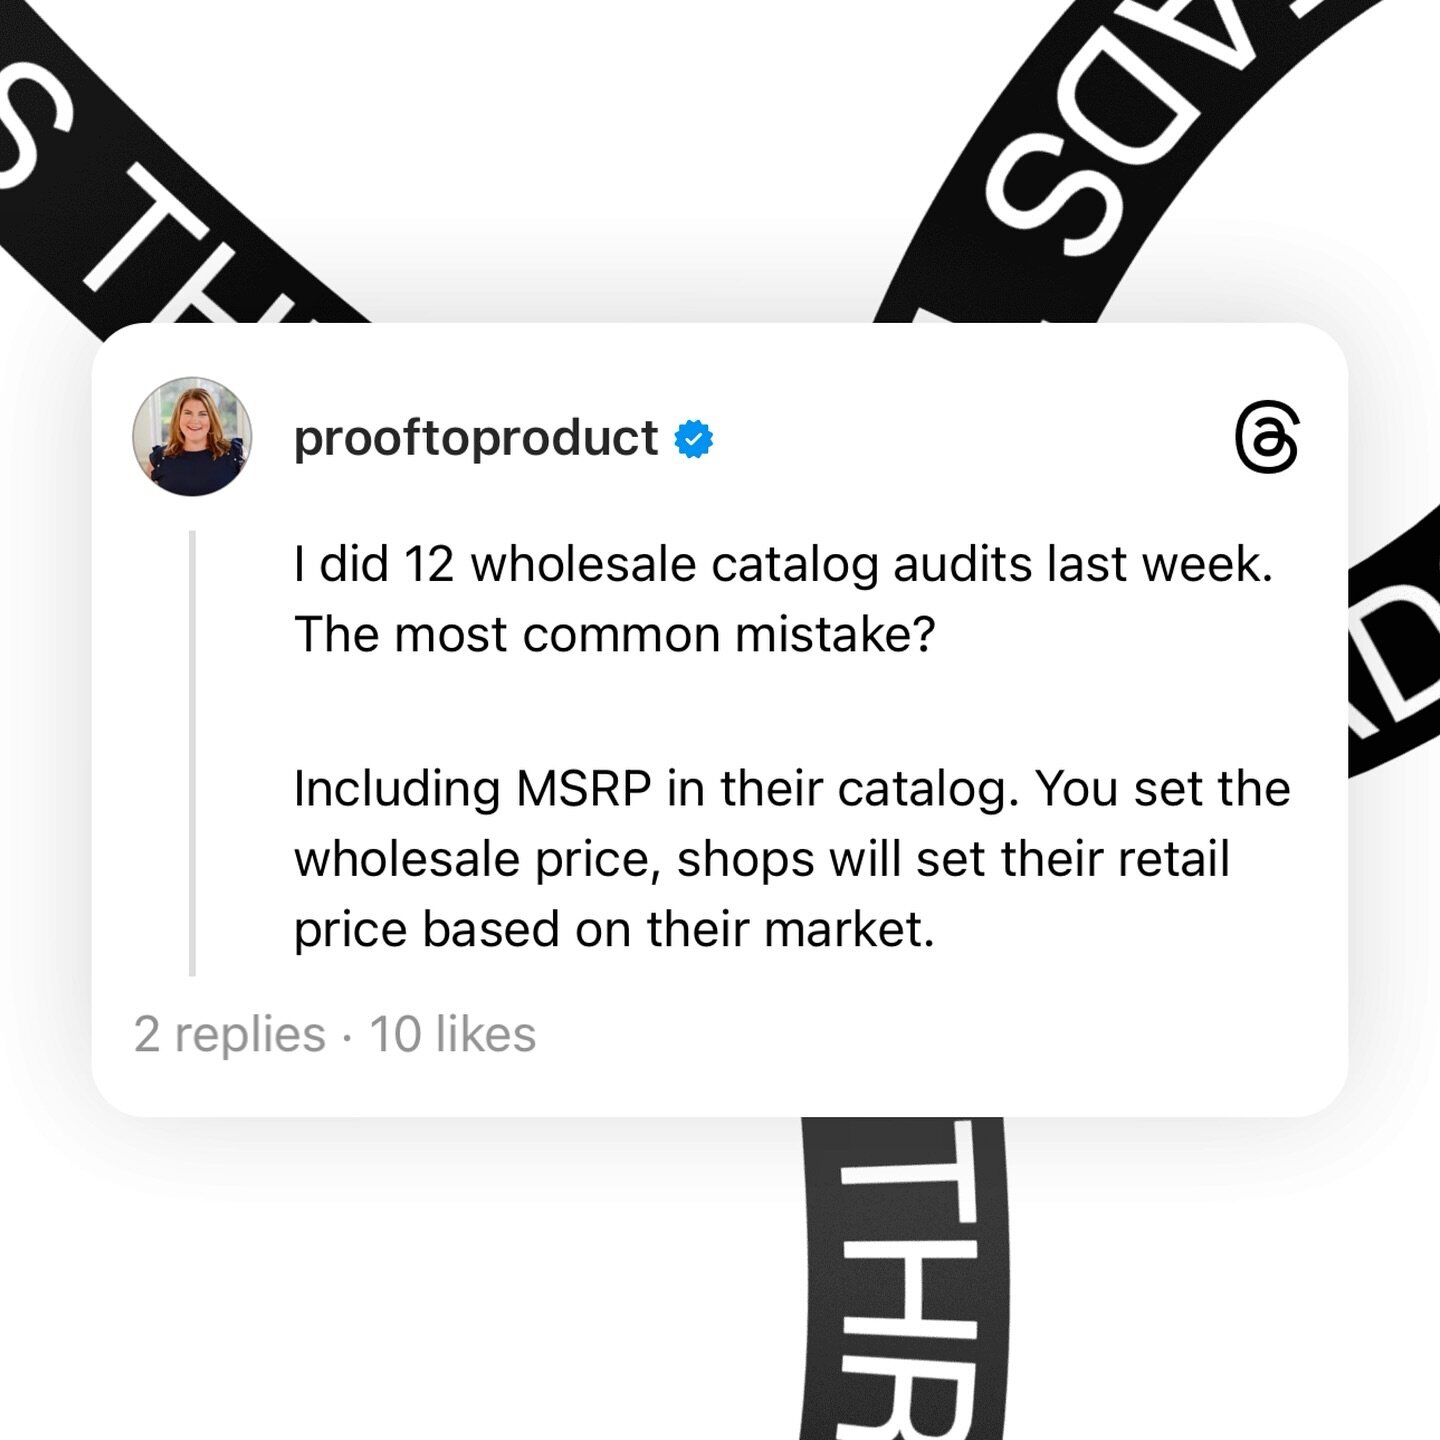 I did 12 wholesale catalog audits last week in Paper Camp. The most common mistake?

Including MSRP in their catalog. You set the wholesale price, shops will set their retail price based on their market.